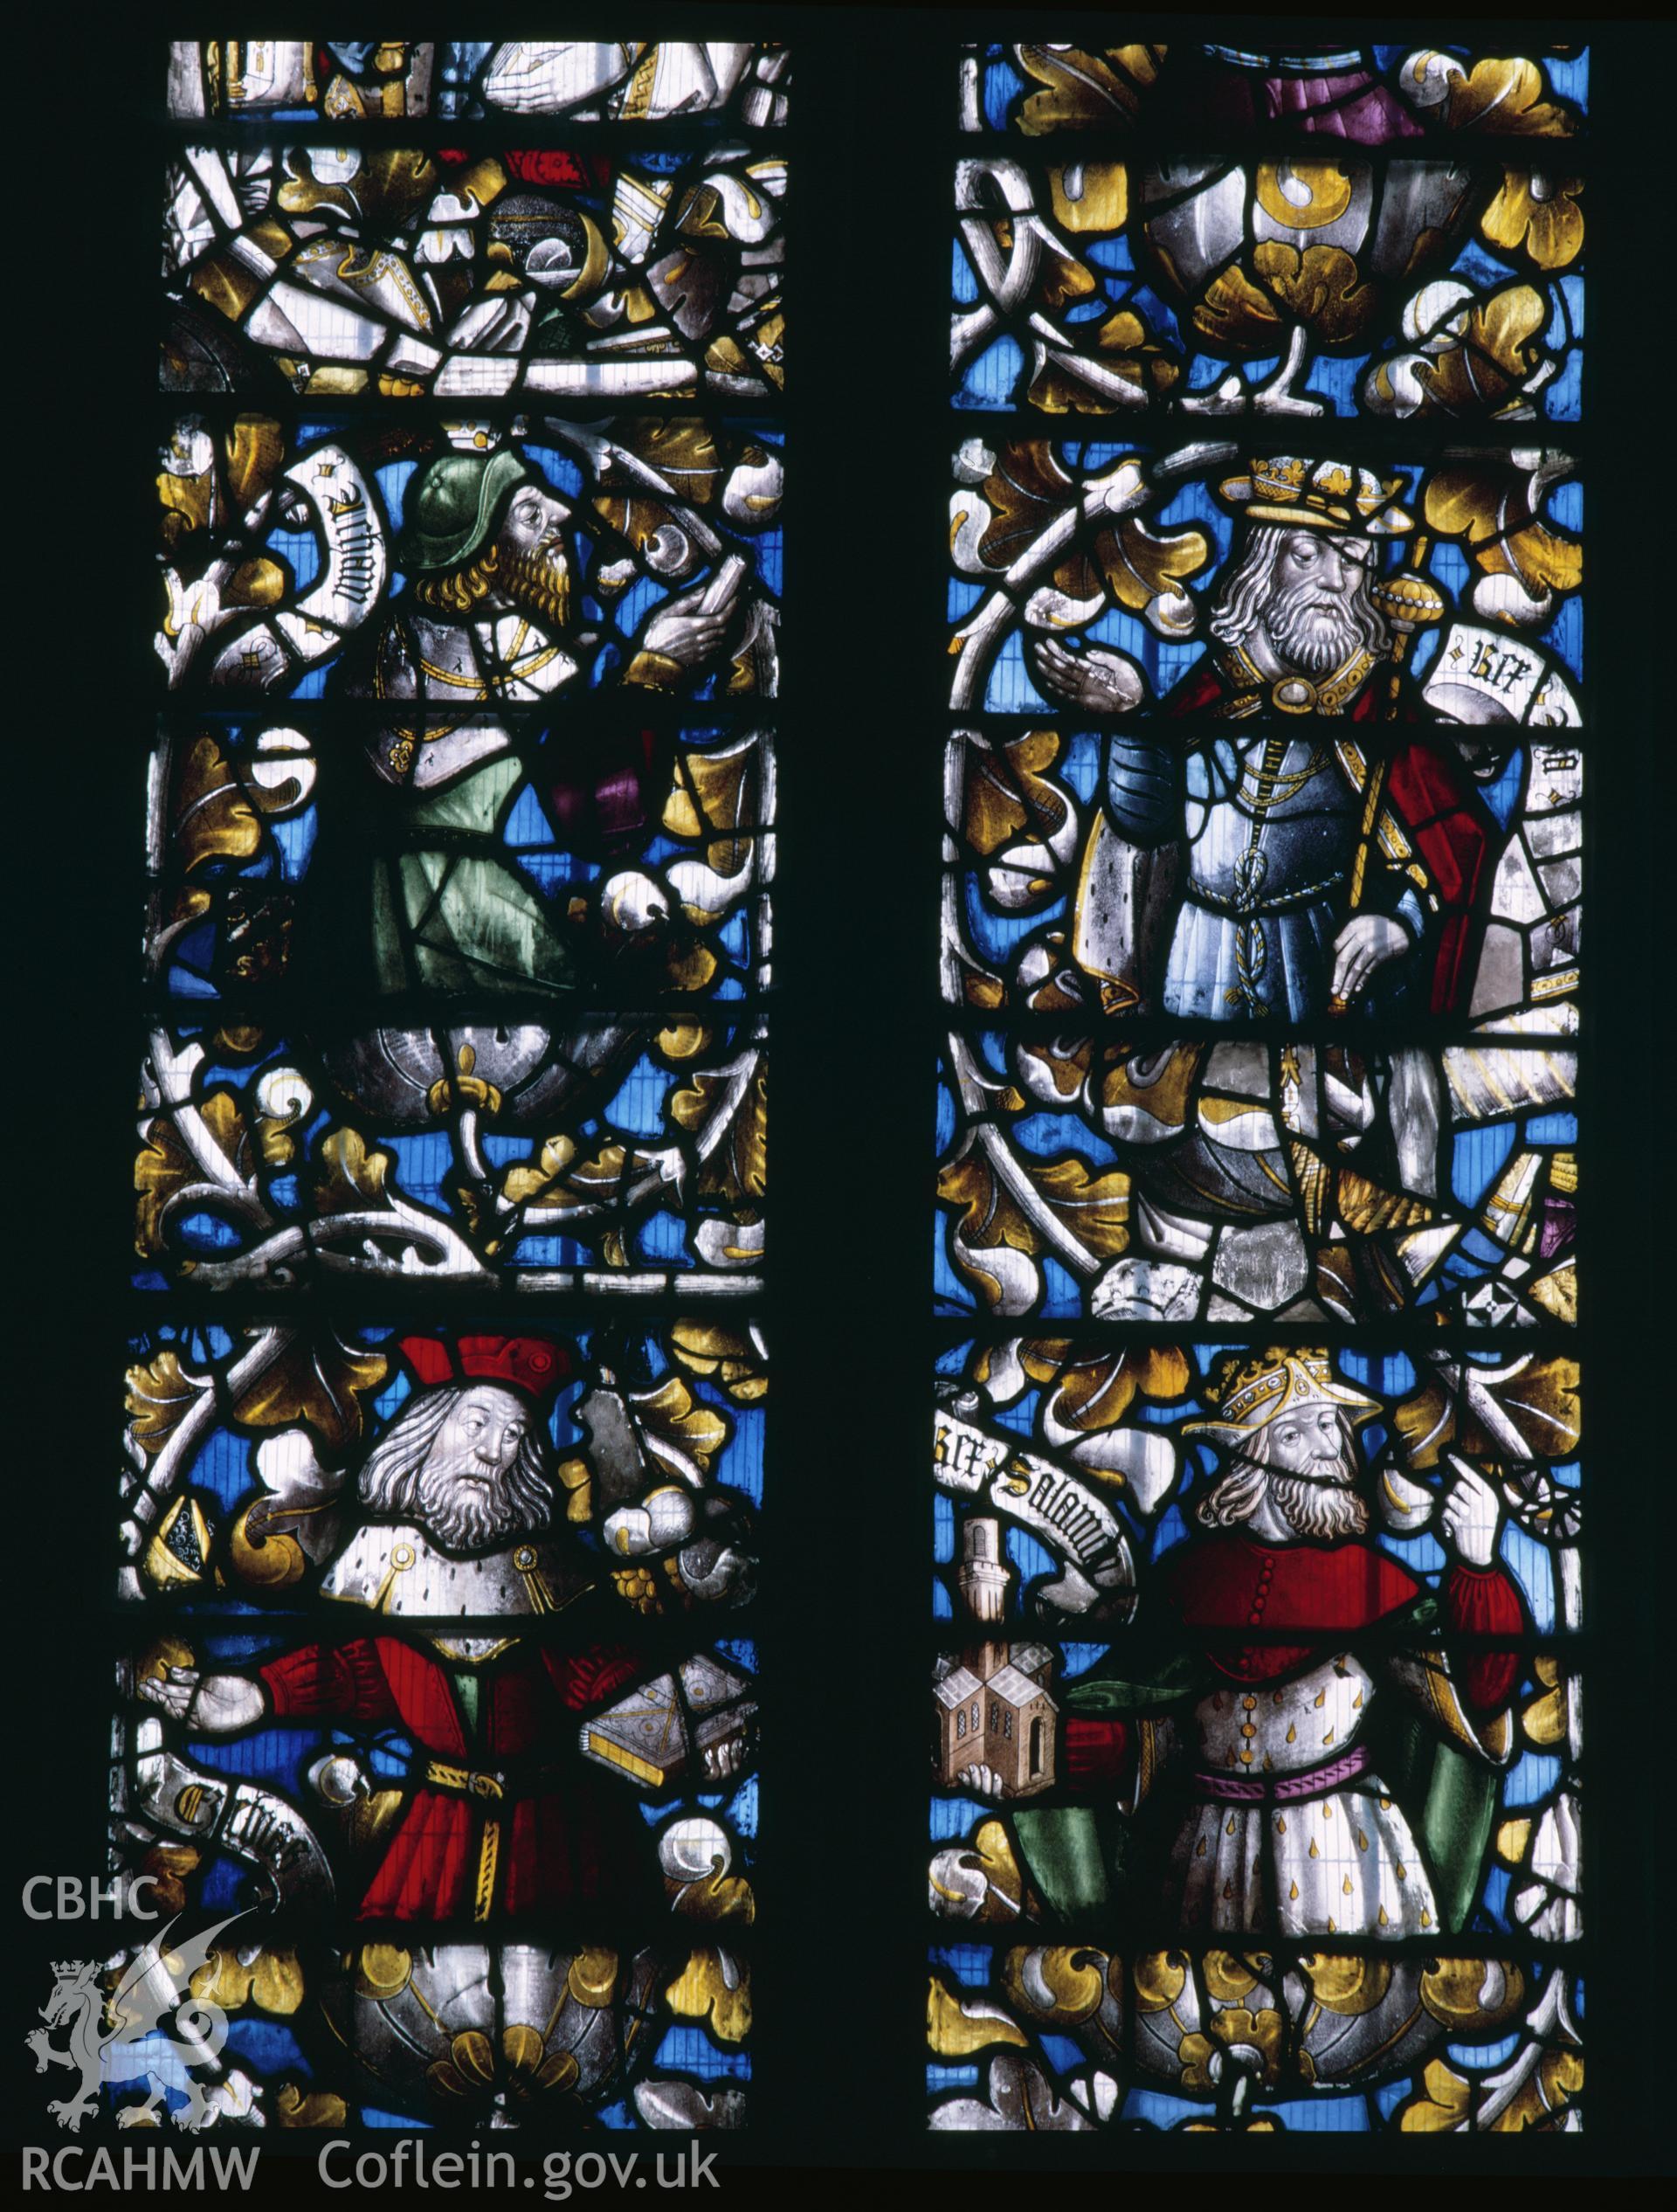 Interior: Stained glass window detail